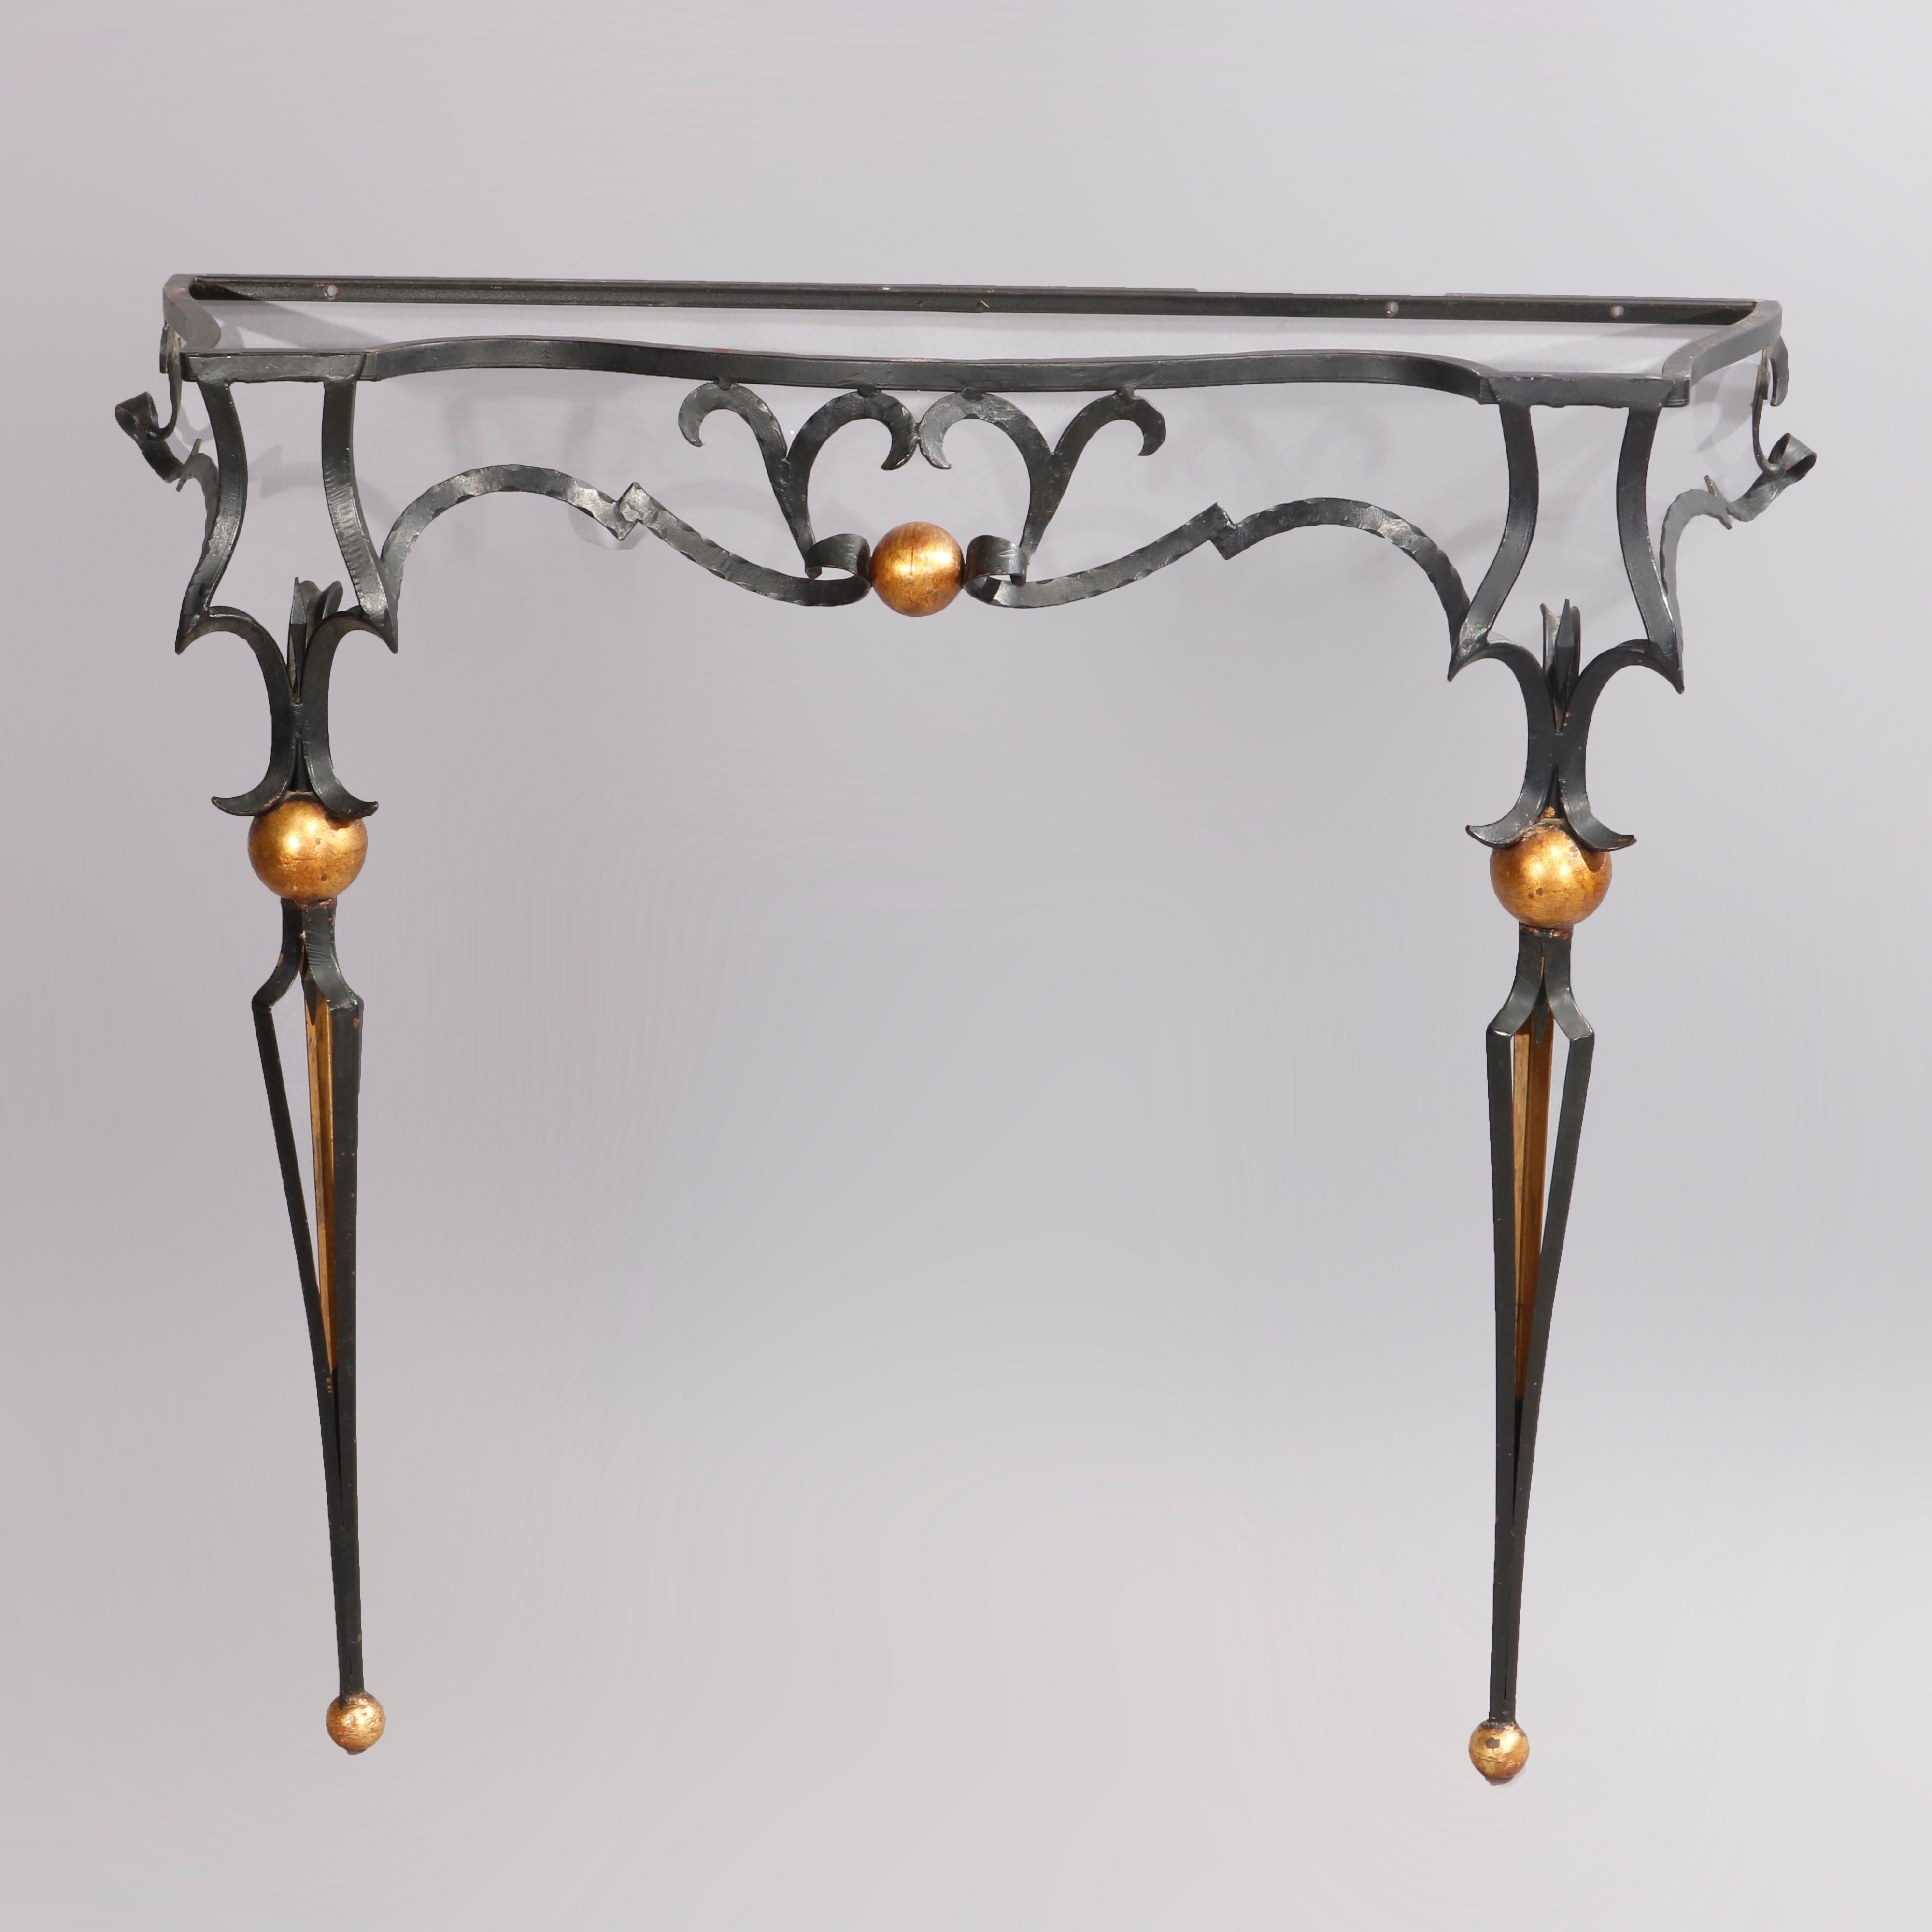 Antique Italian Parcel Gilt Wrought Iron Marble Top Console Table, 20th Century 1